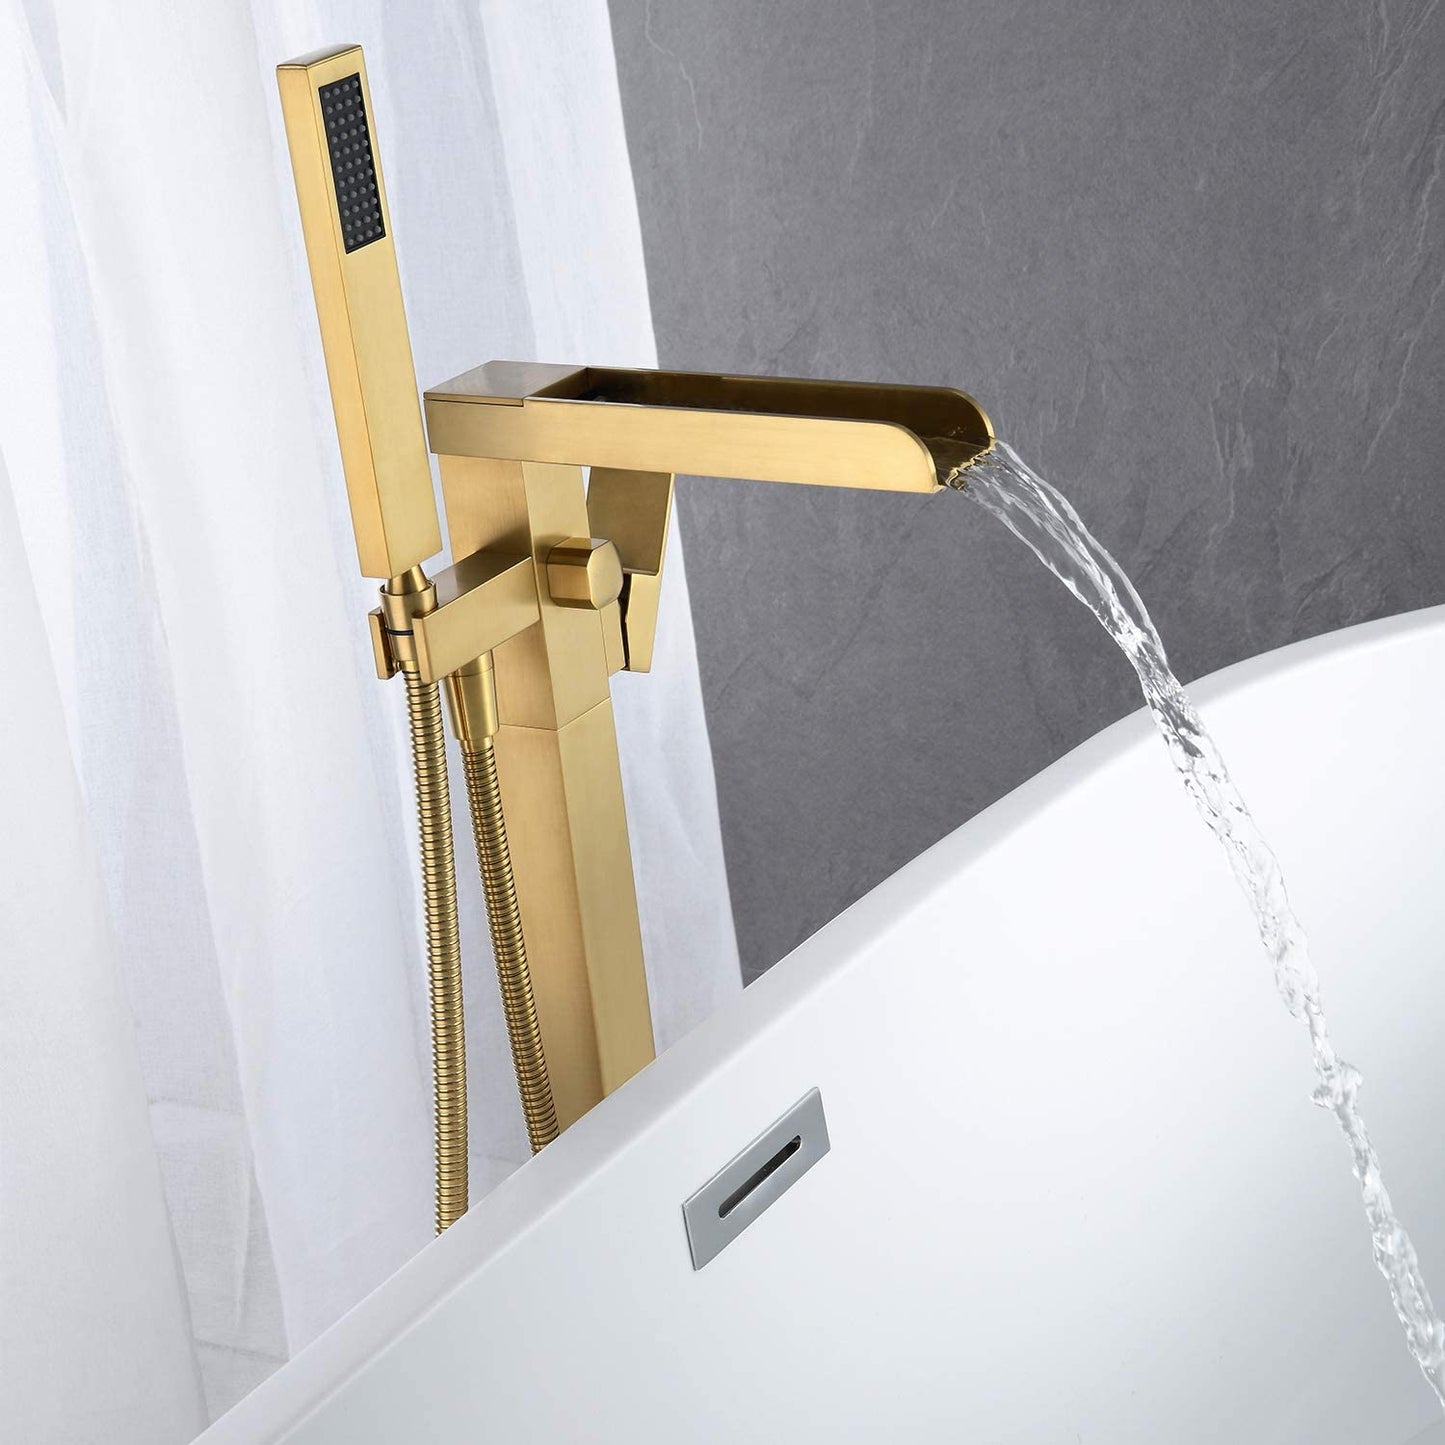 Brushed gold/Black Freestanding Bathtub Faucet Floor Mount Tub Filler Single Handle Brass Tap with Hand Shower and Swivel Spout - WELQUEEN HOME DECOR